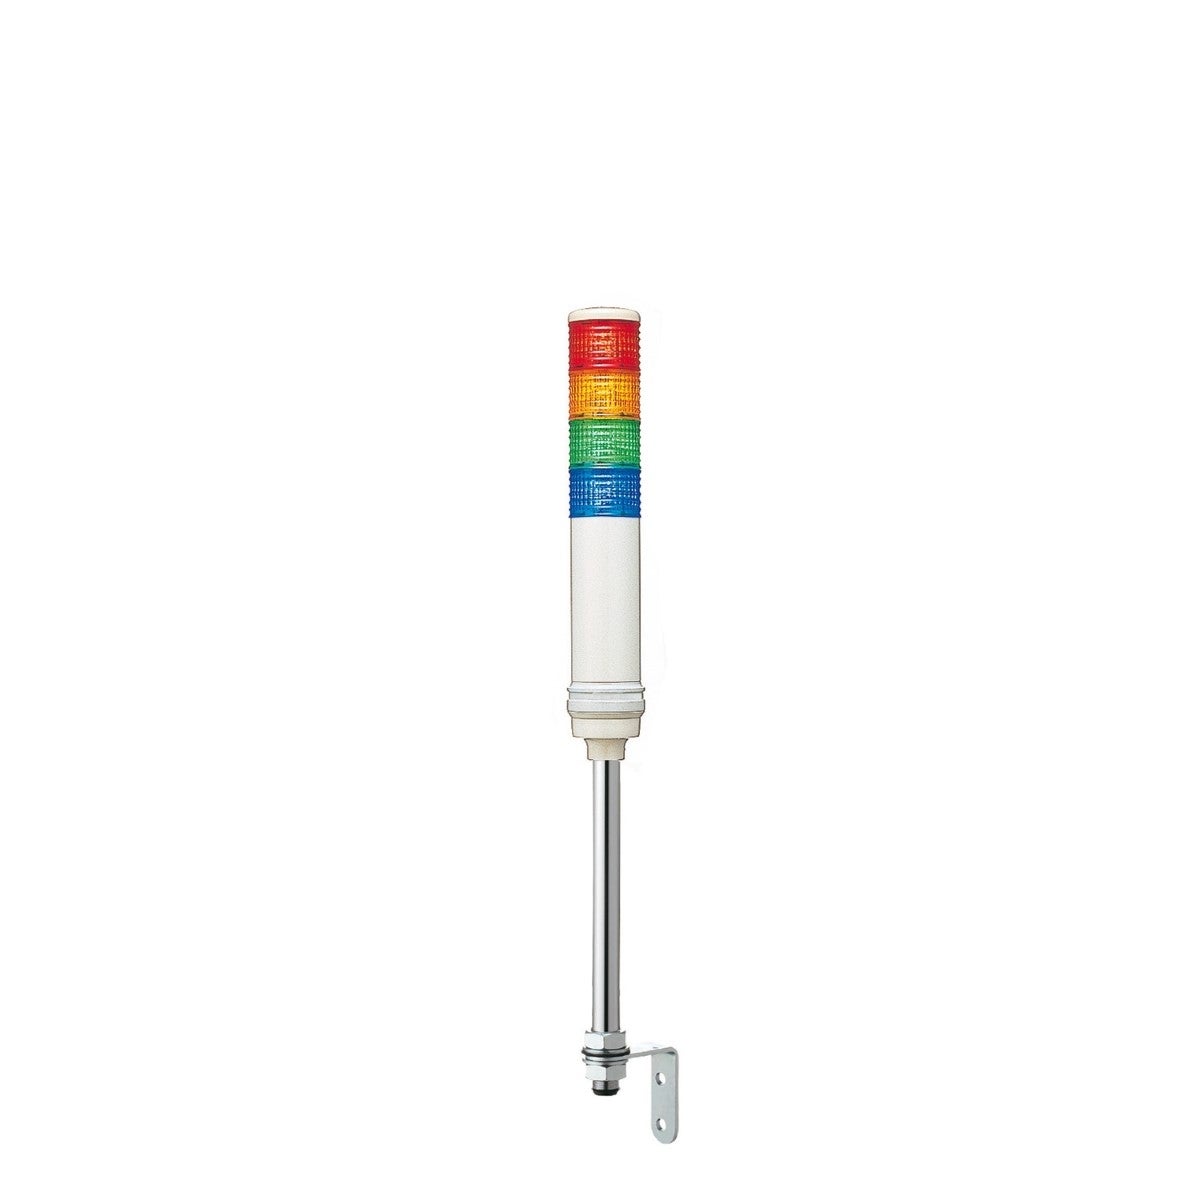 Harmony XVC, Monolithic precabled tower light, plastic, red orange green blue, Ø60, tube mounting, steady, IP23, 100...240 V AC